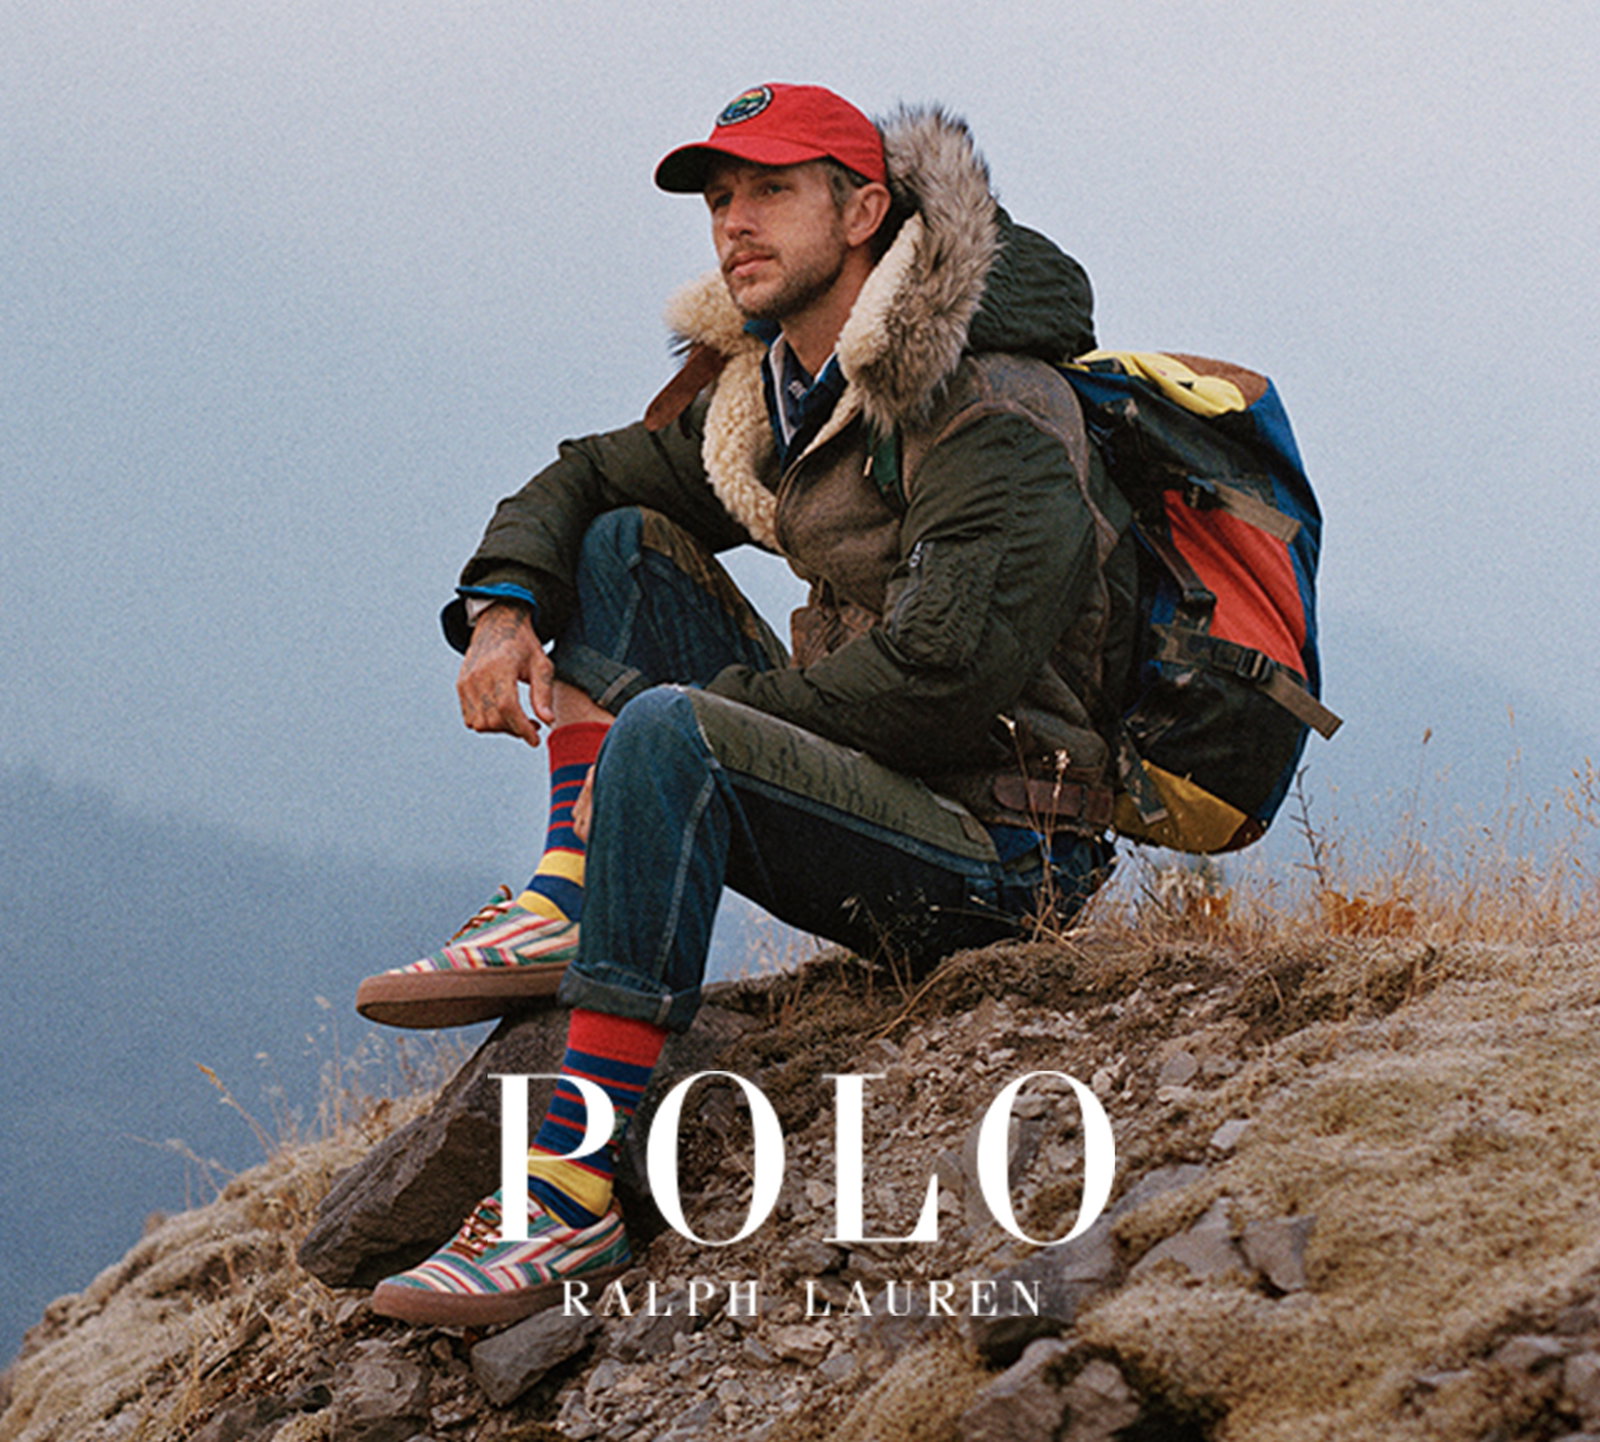 polo ralph lauren great outdoors collection